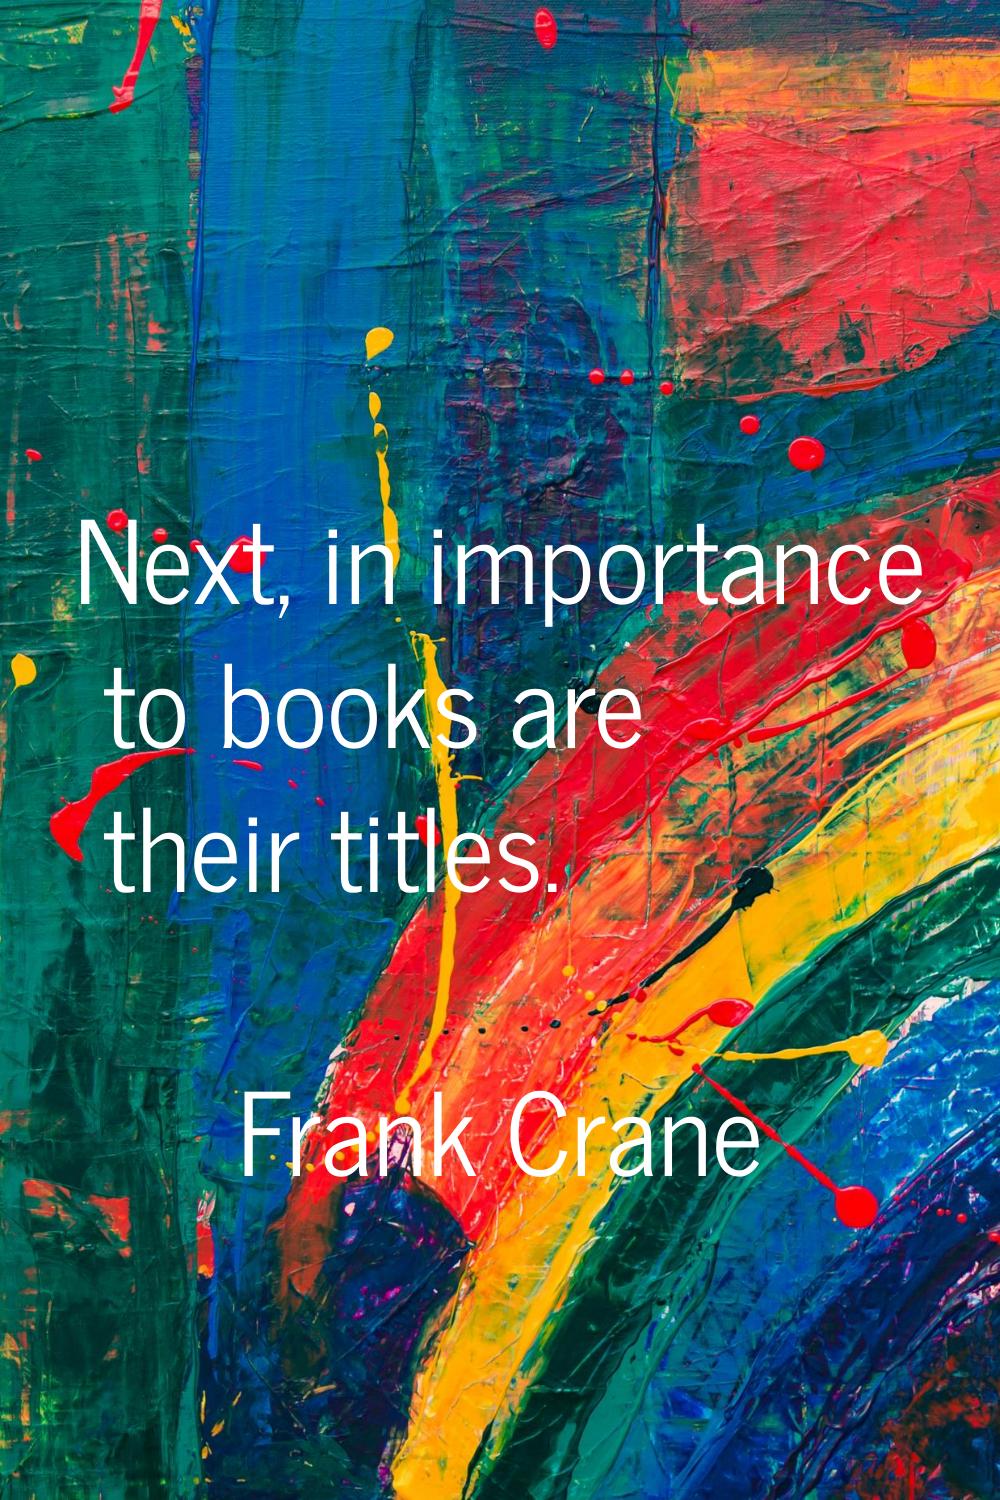 Next, in importance to books are their titles.